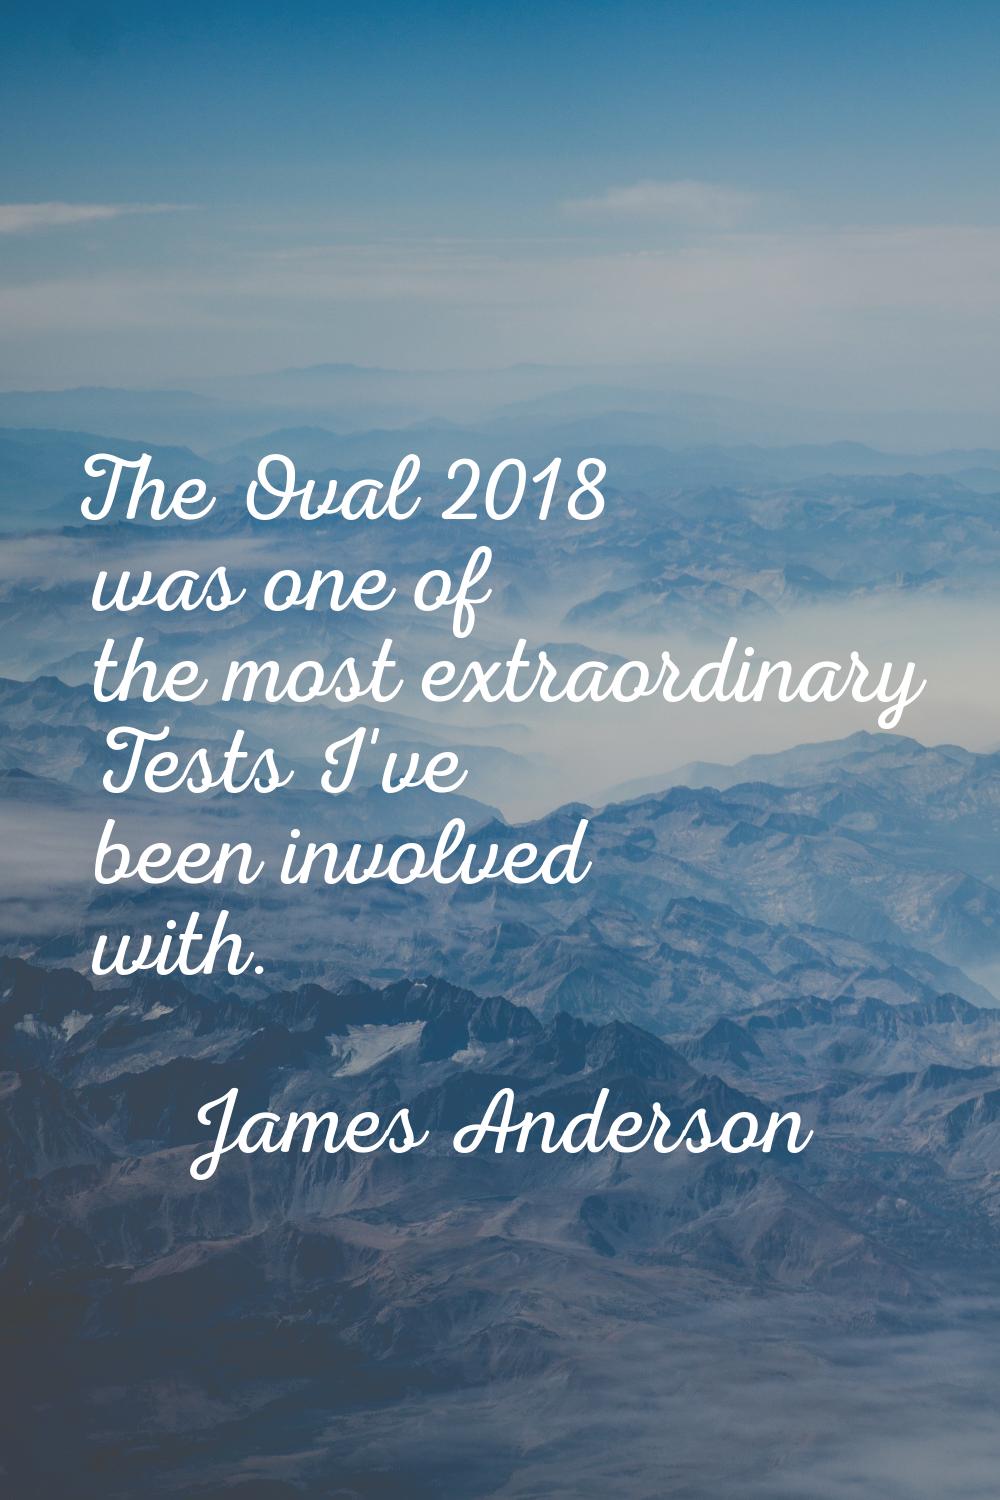 The Oval 2018 was one of the most extraordinary Tests I've been involved with.